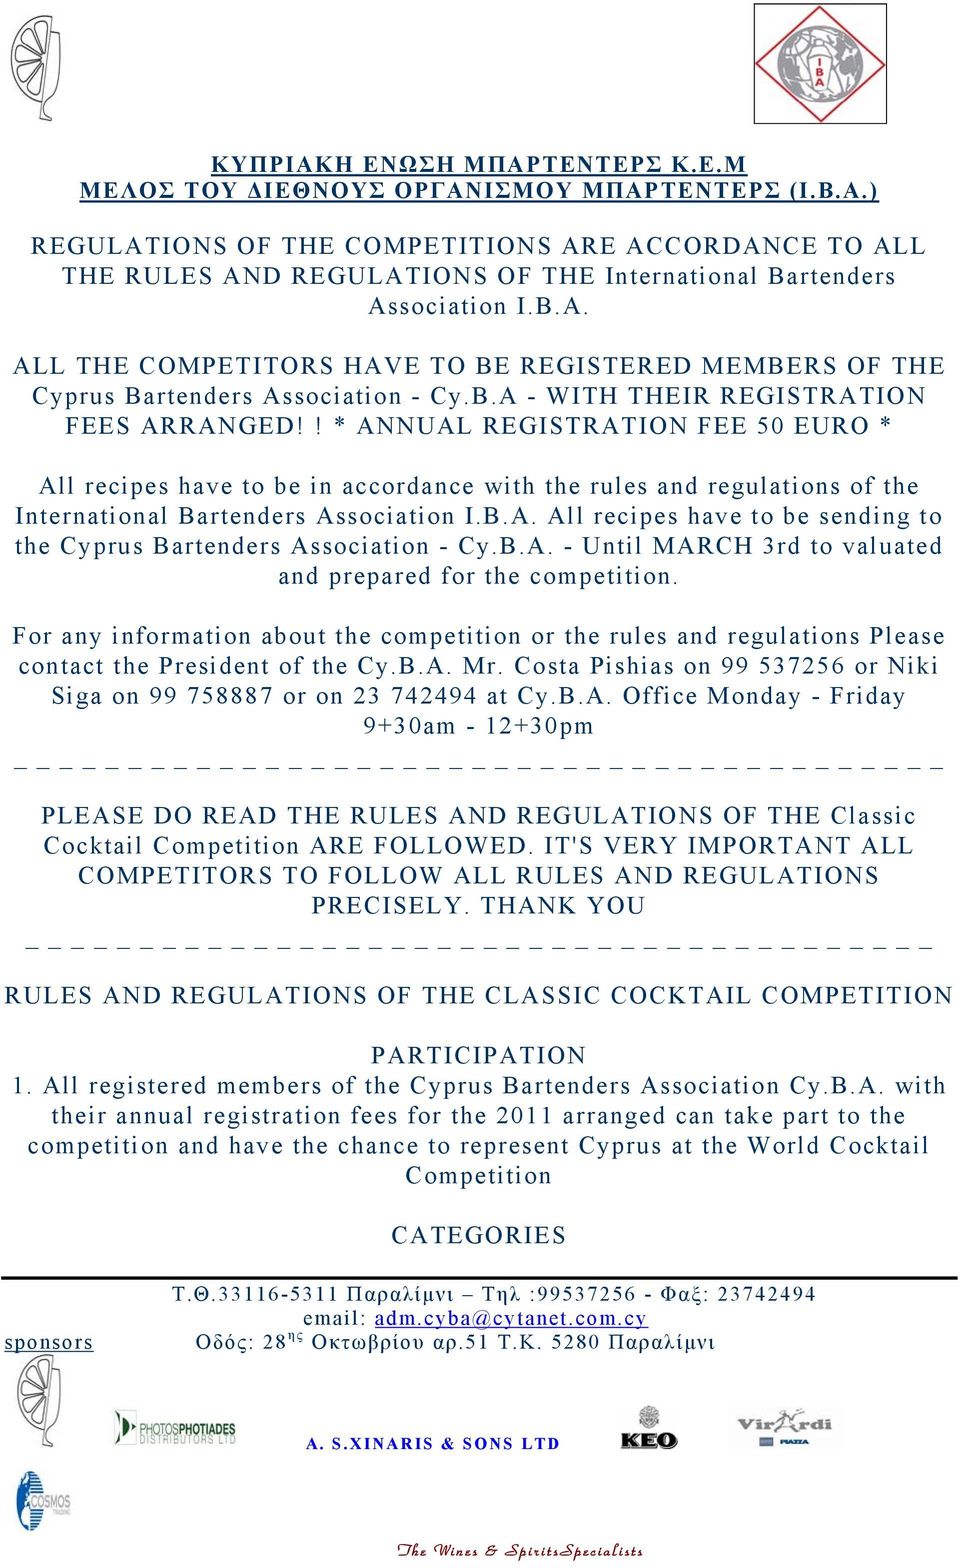 B.A. - Until MARCH 3rd to valuated and prepared for the competition. For any information about the competition or the rules and regulations Please contact the President of the Cy.B.A. Mr.